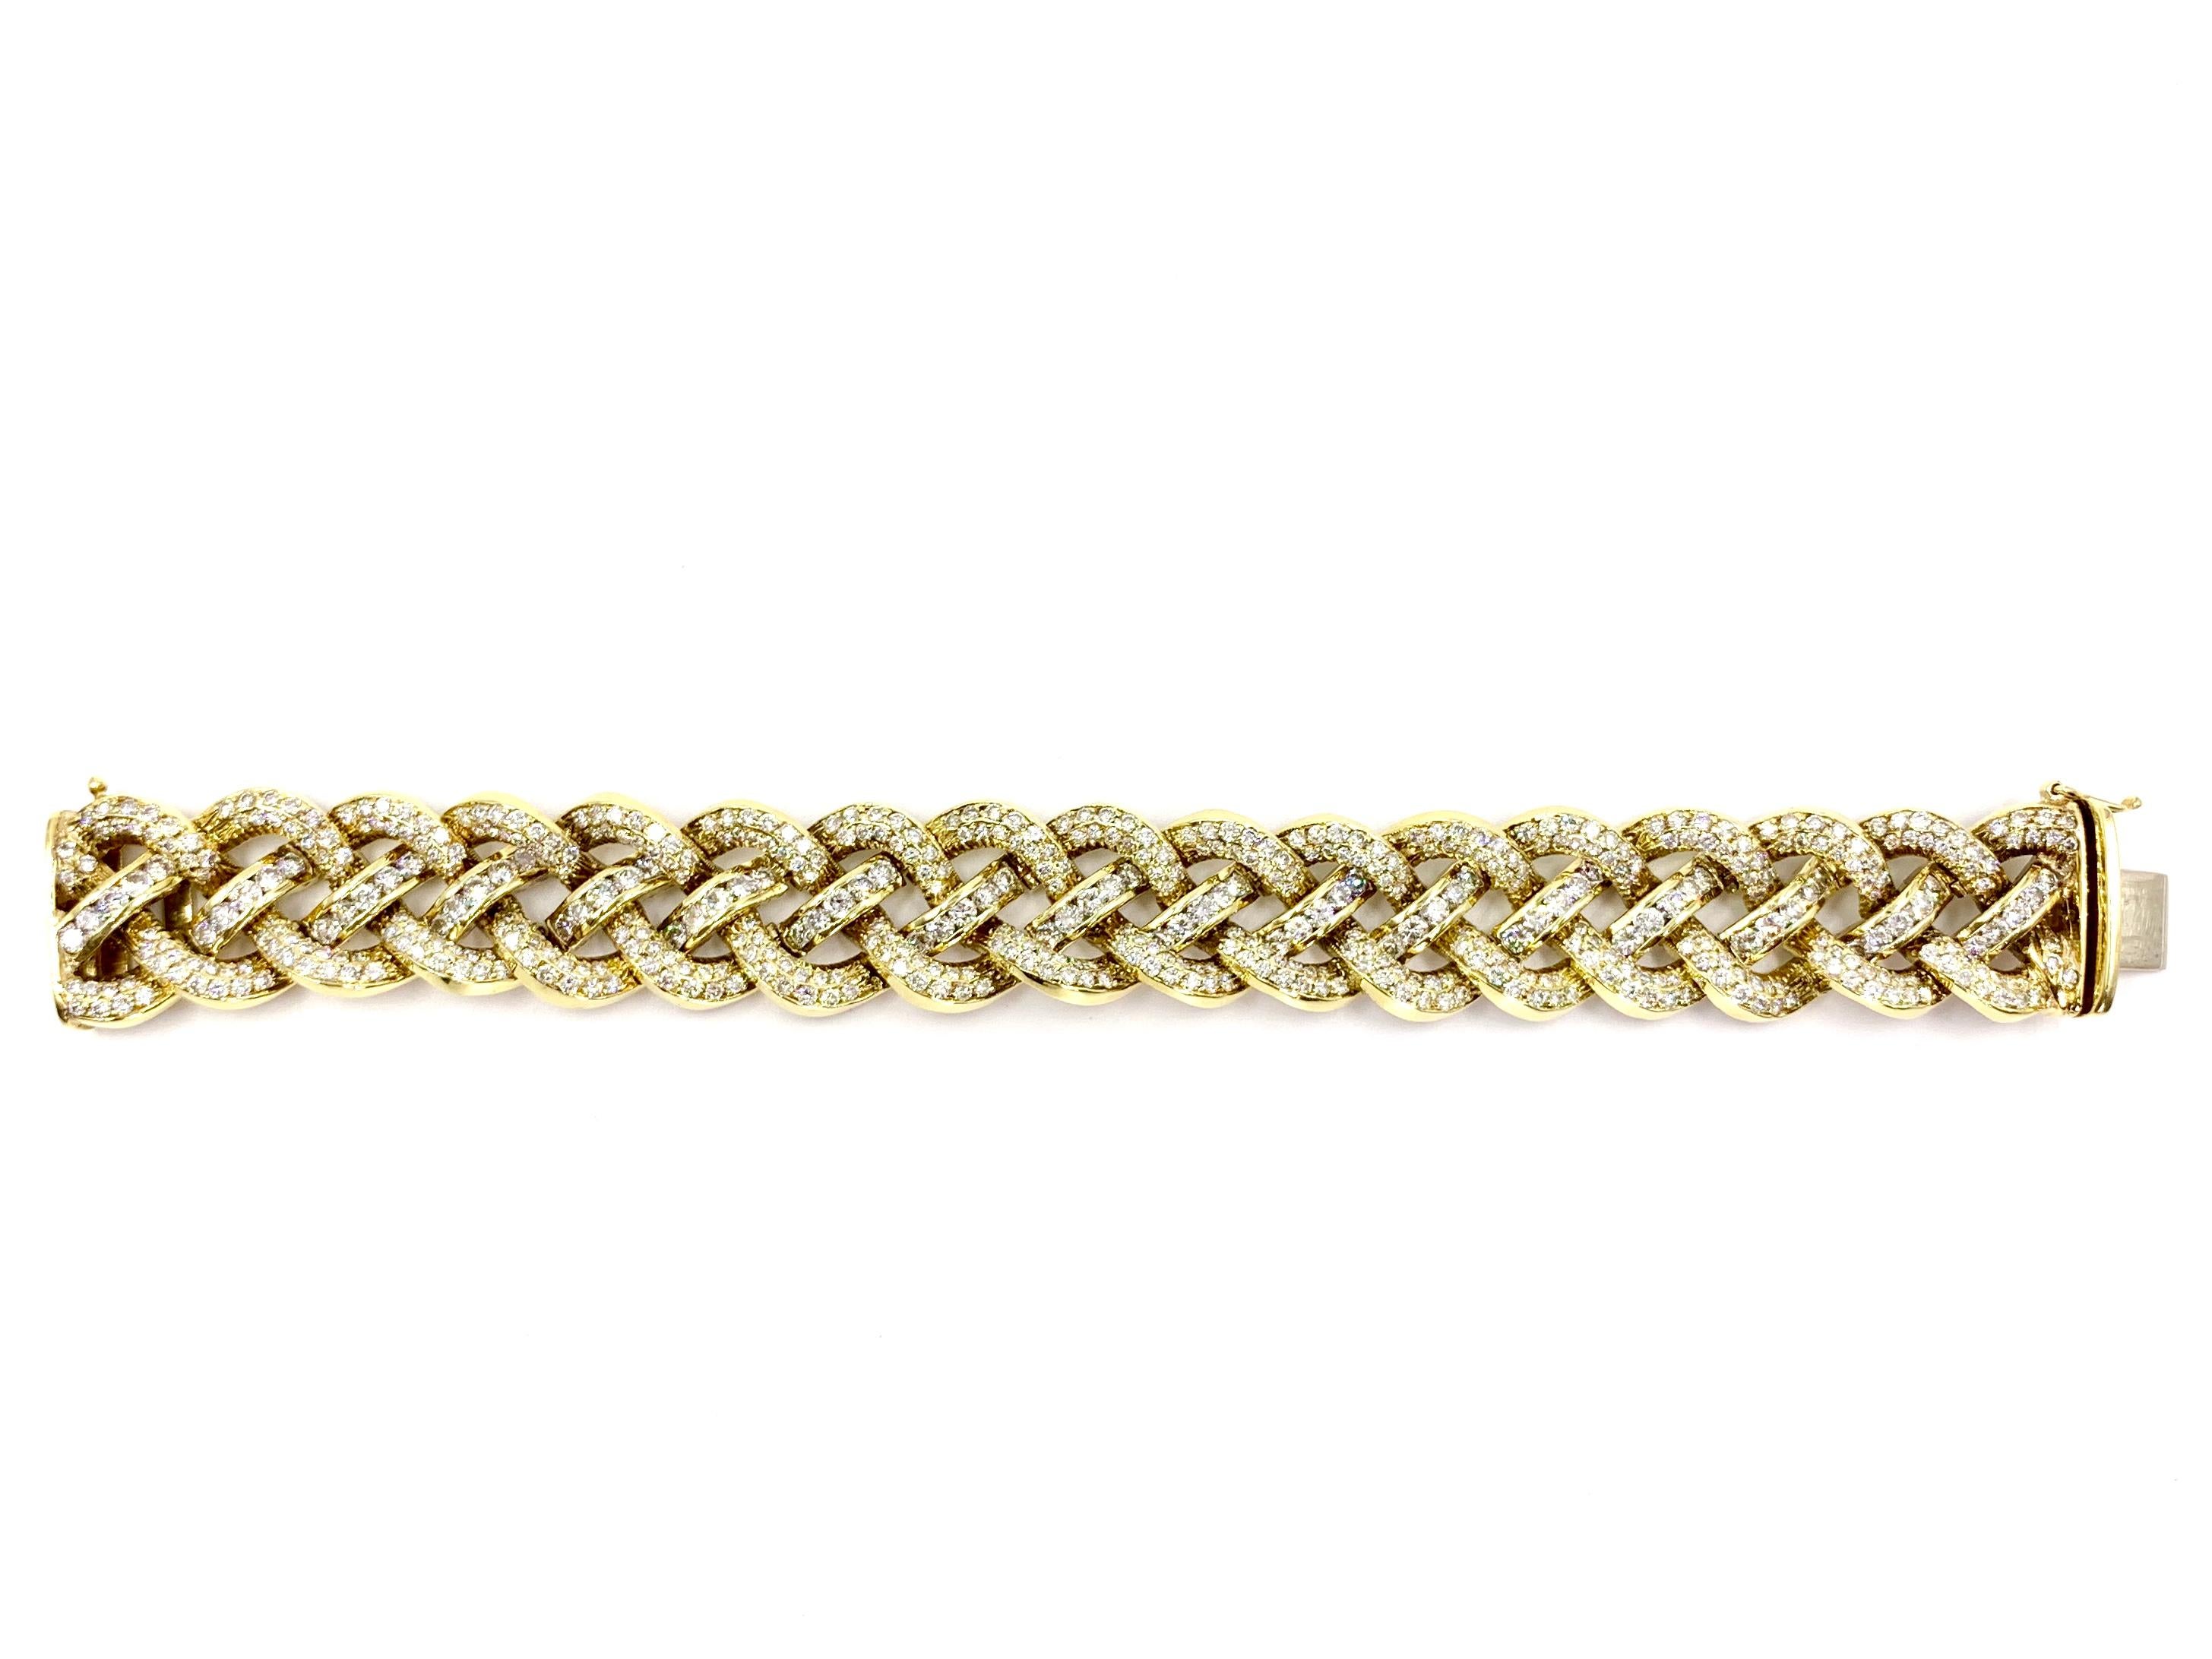 18 karat yellow gold open woven diamond bracelet featuring 12.60 carats of round brilliant diamonds. Diamonds are approximately F color, VS2 clarity. Bracelet gives the illusion that four strands weave perfectly together while individual links go